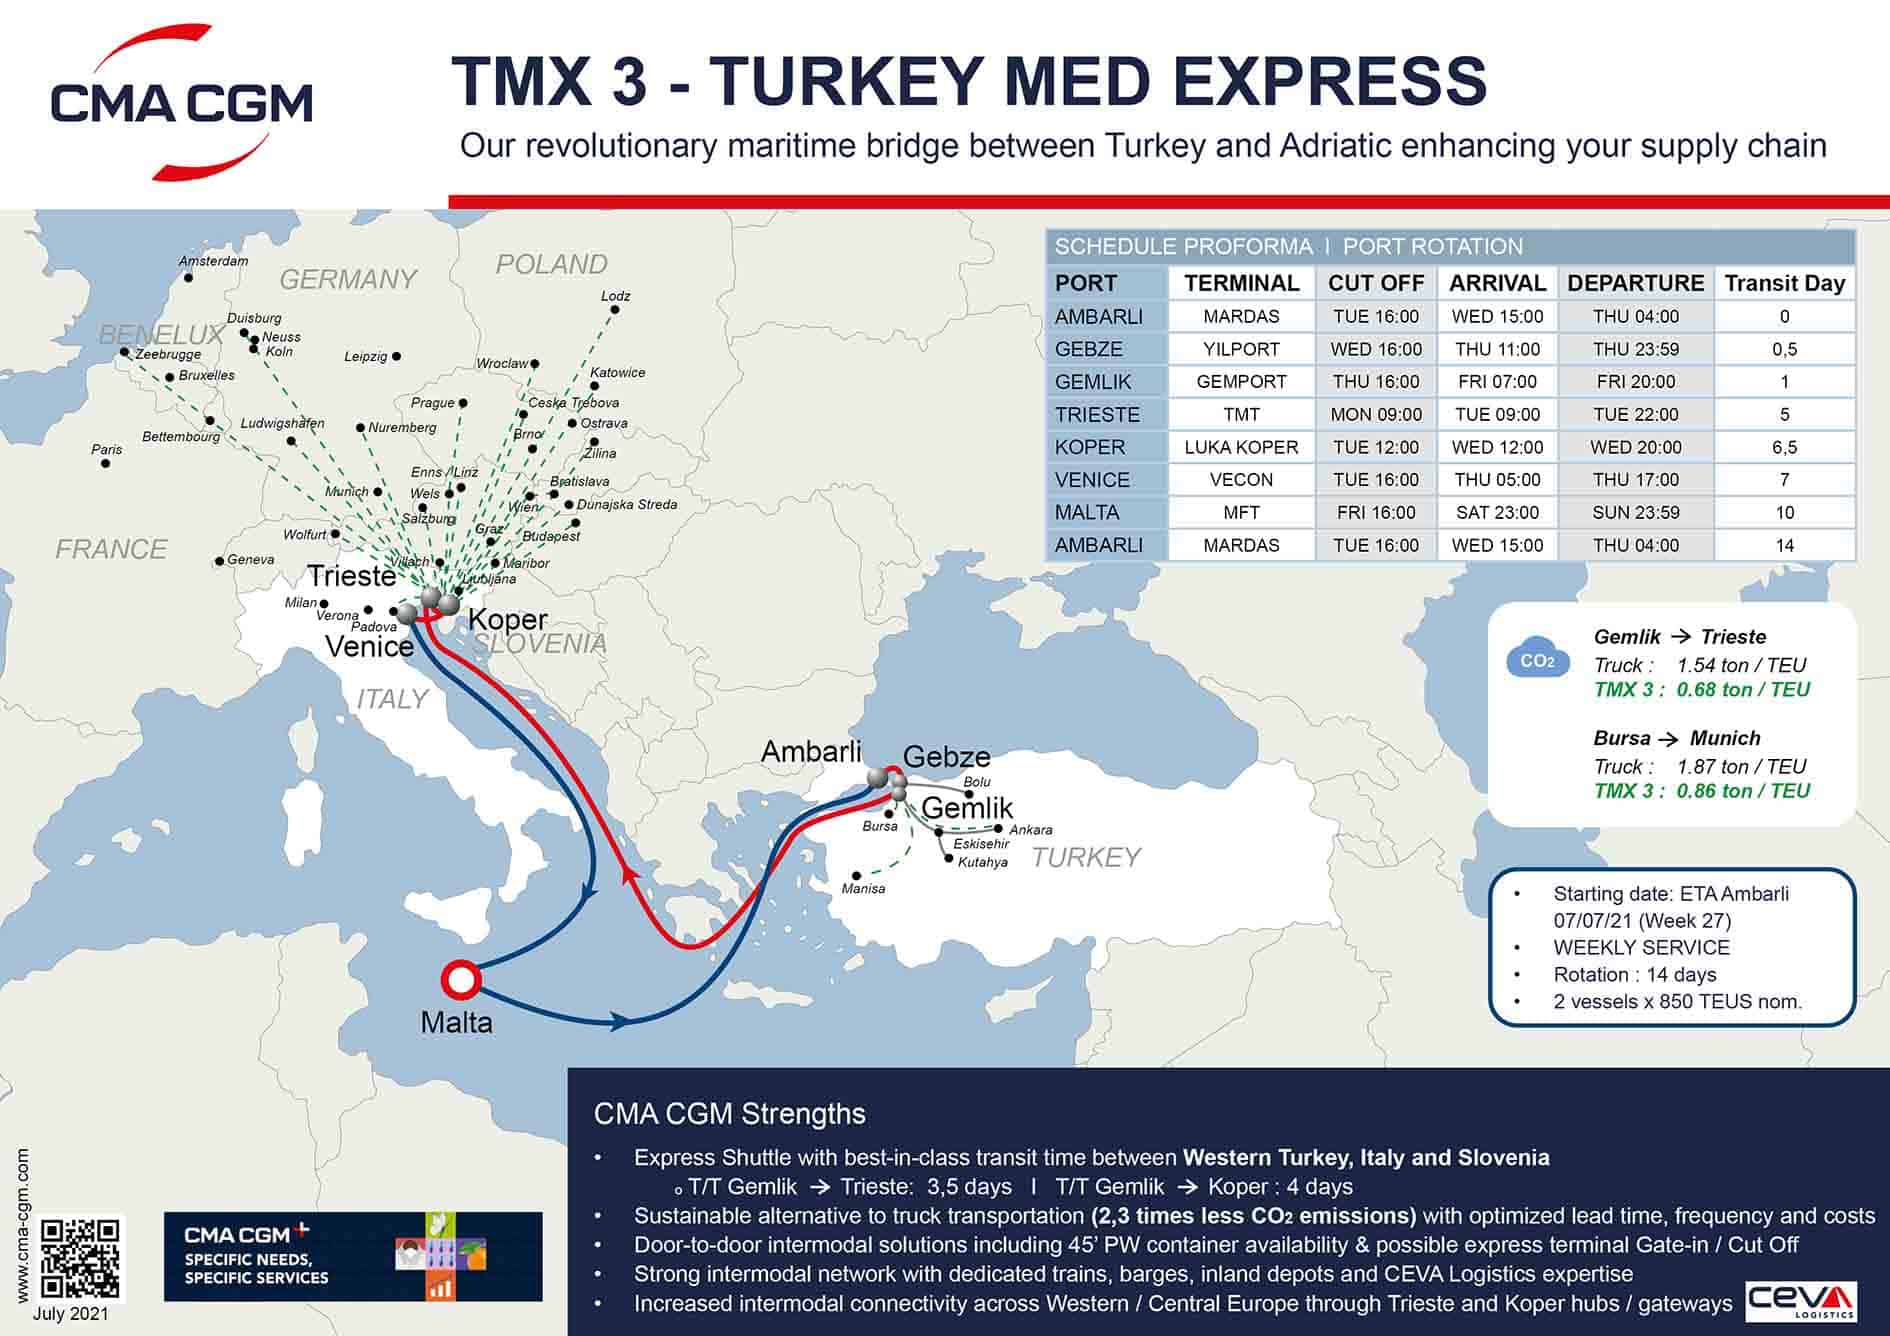 CMA CGM launches new short sea service between Western Turkey and Adriatic